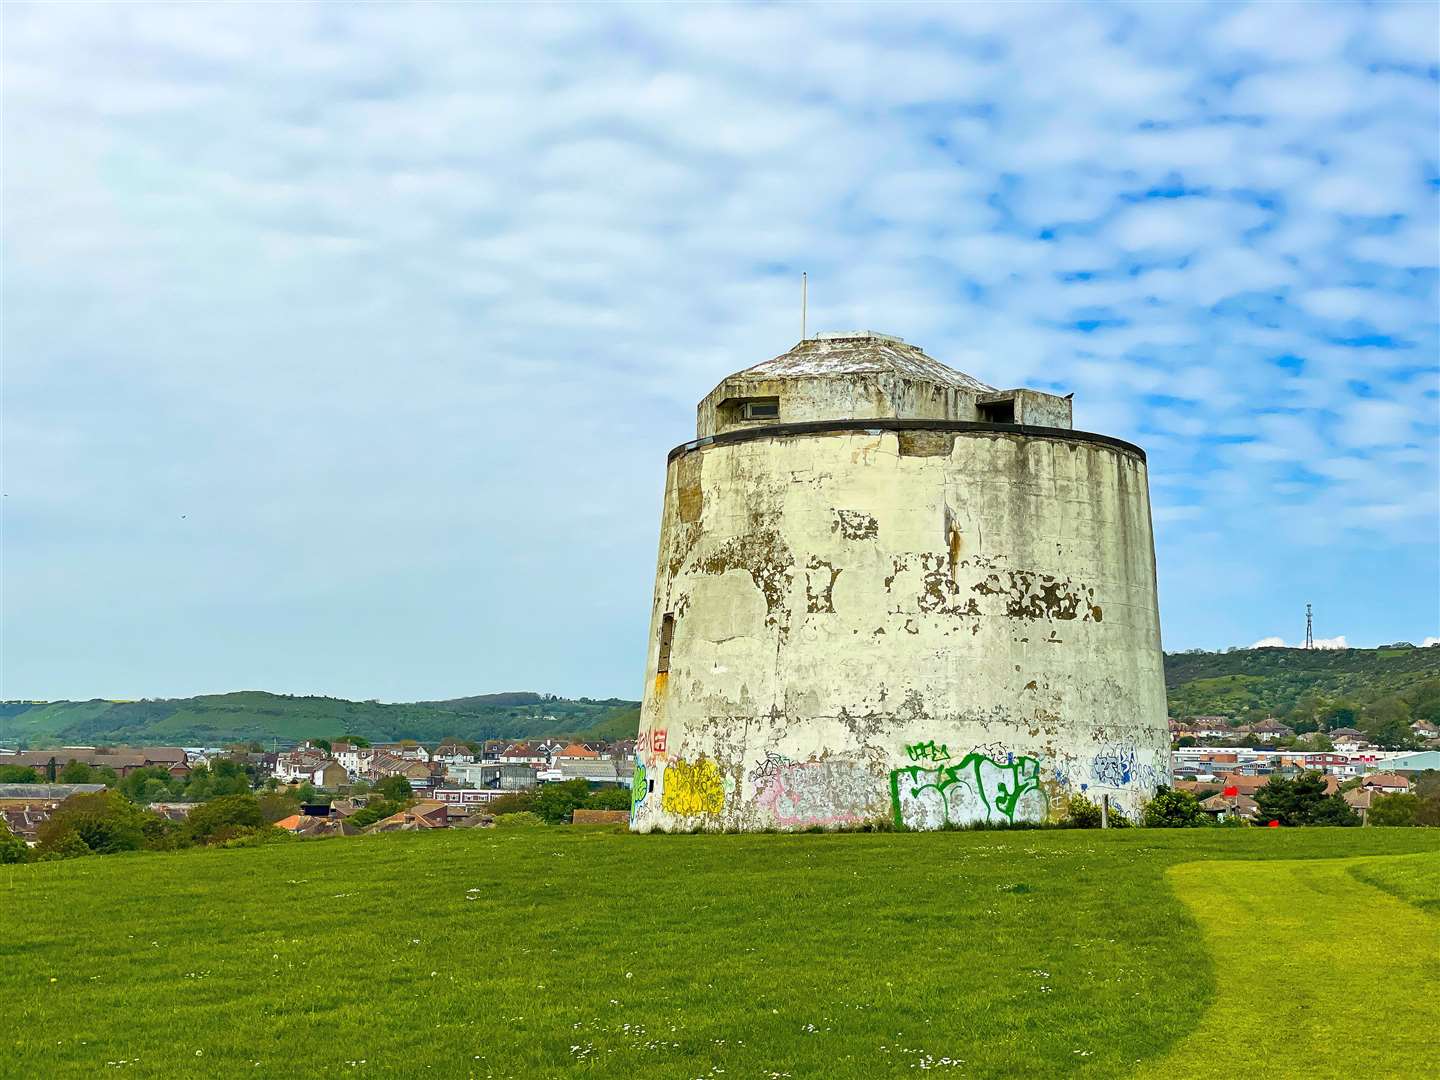 The Coast Blockade team were often stationed at Martello Towers - like this one in Folkestone, Picture: Daniel Falvey